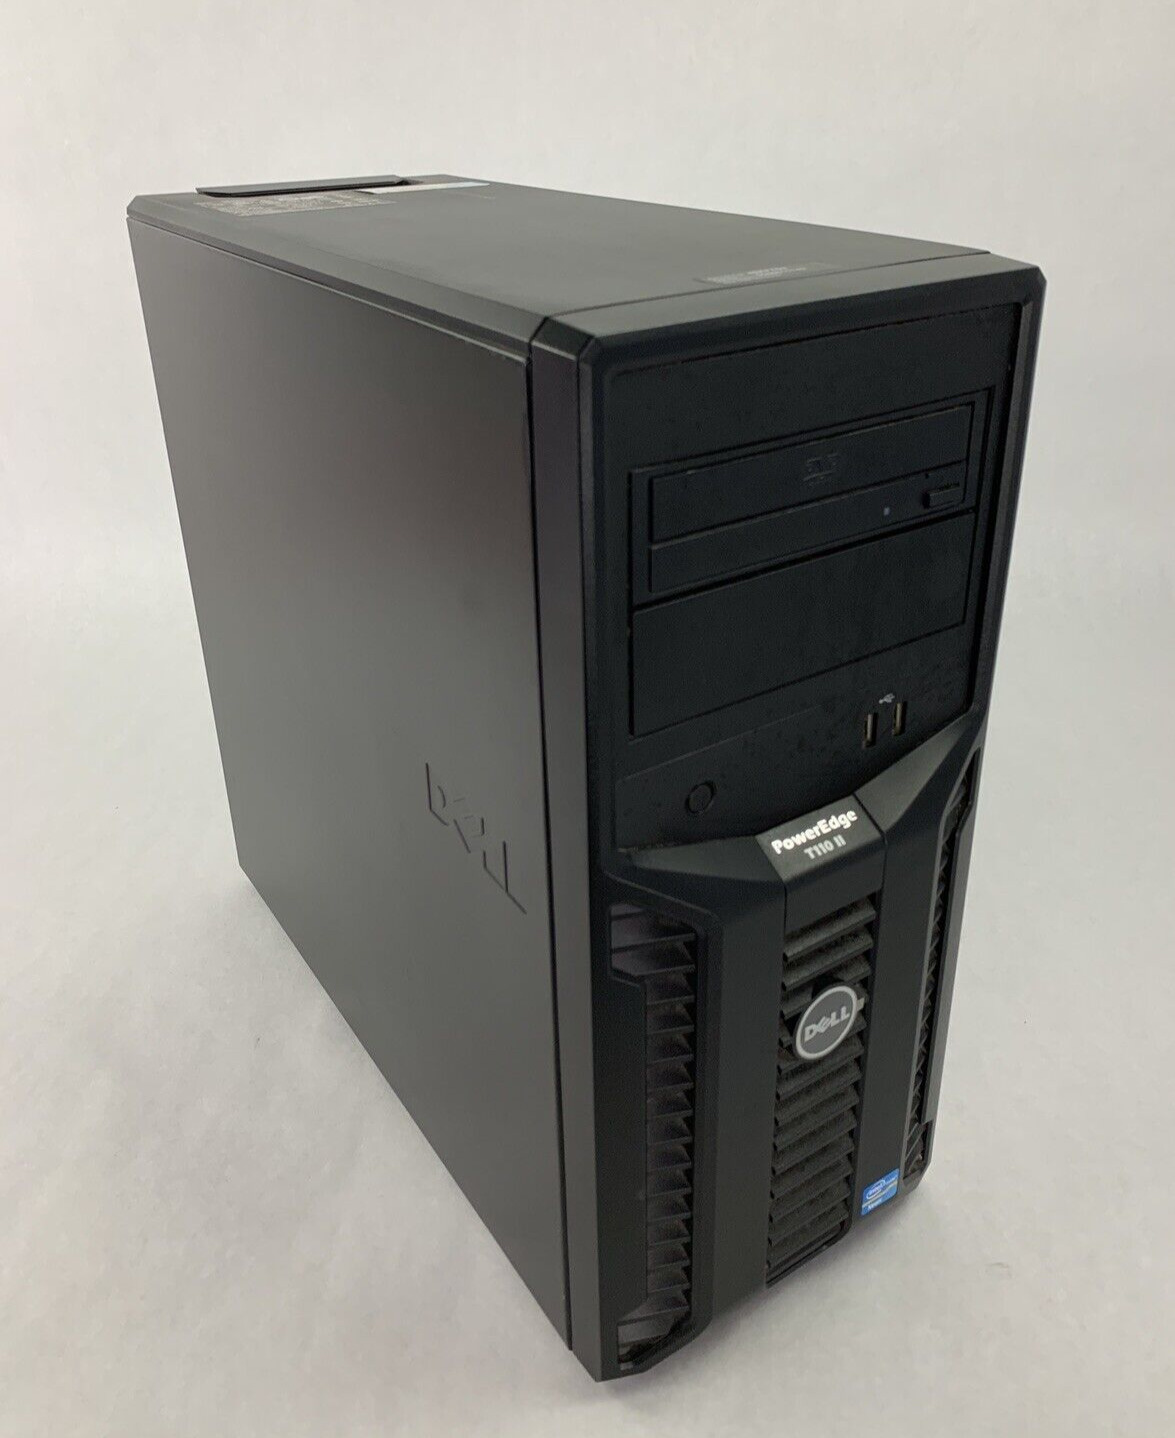 Dell PowerEdge T110 II Tower Xeon E3-1230 3.3 GHz 16 GB No OS No HDD